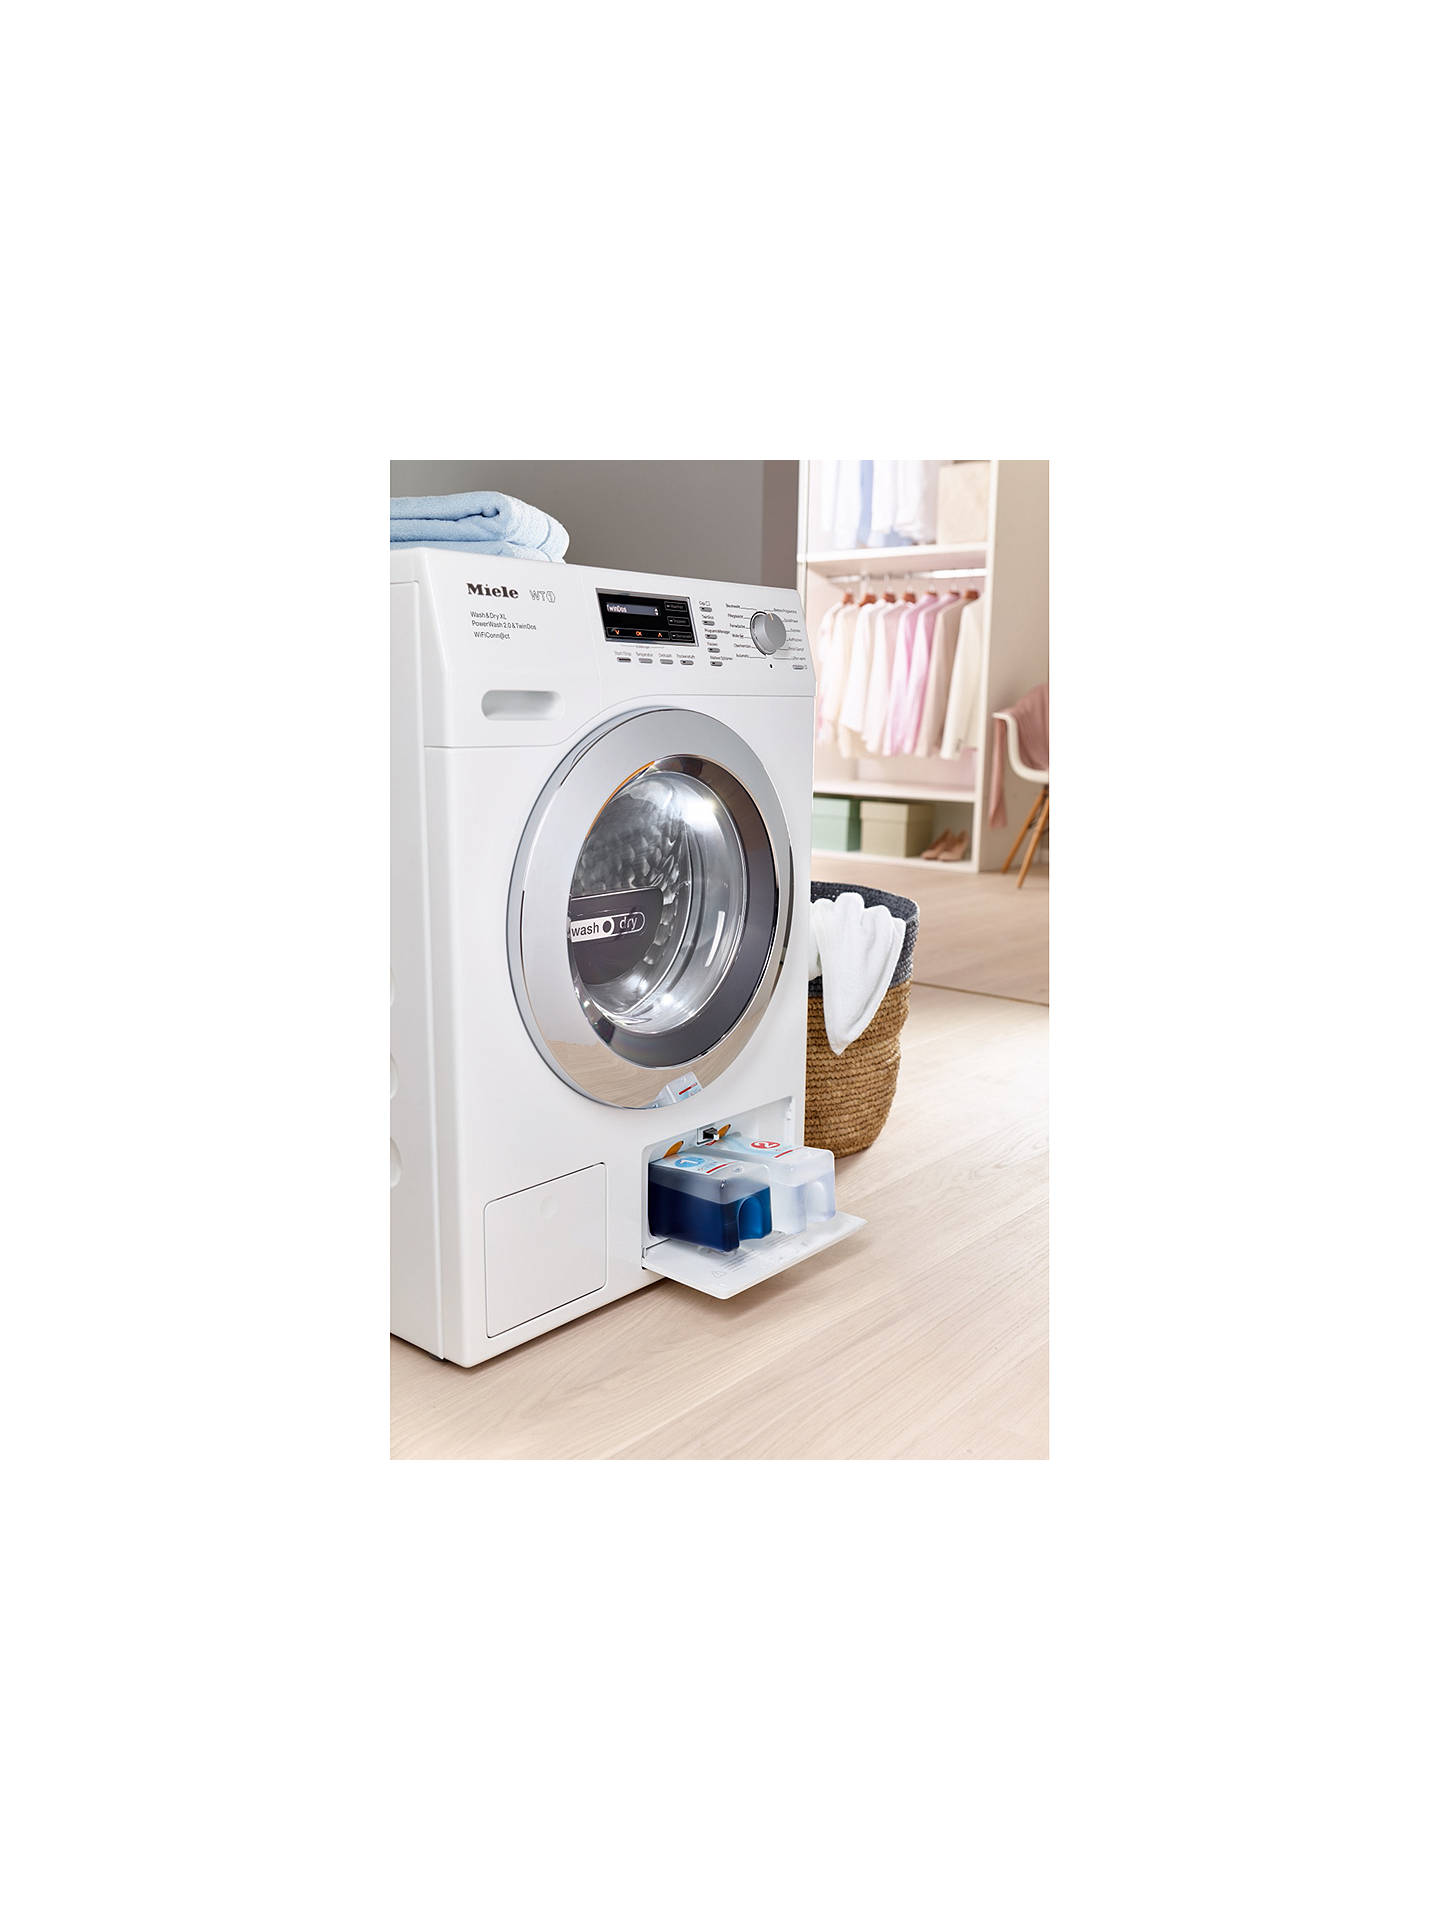 miele-wth120wpm-washer-dryer-7kg-wash-4kg-dry-load-a-energy-rating